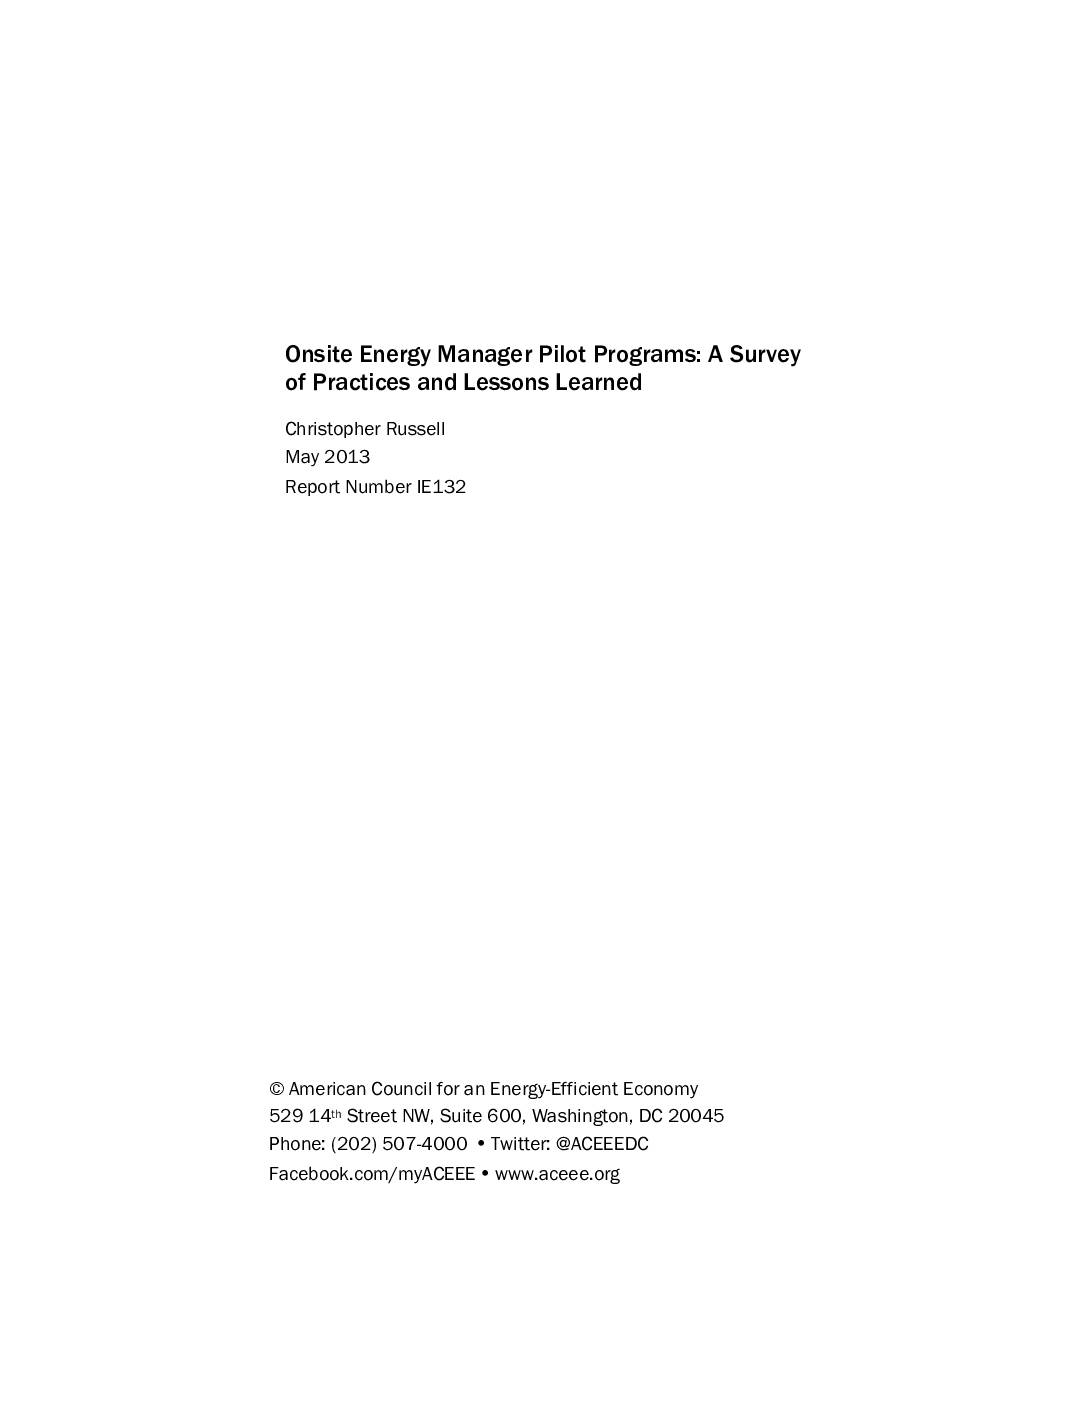 Onsite Energy Manager Pilot Programs: A Survey of Practices and Lessons Learned